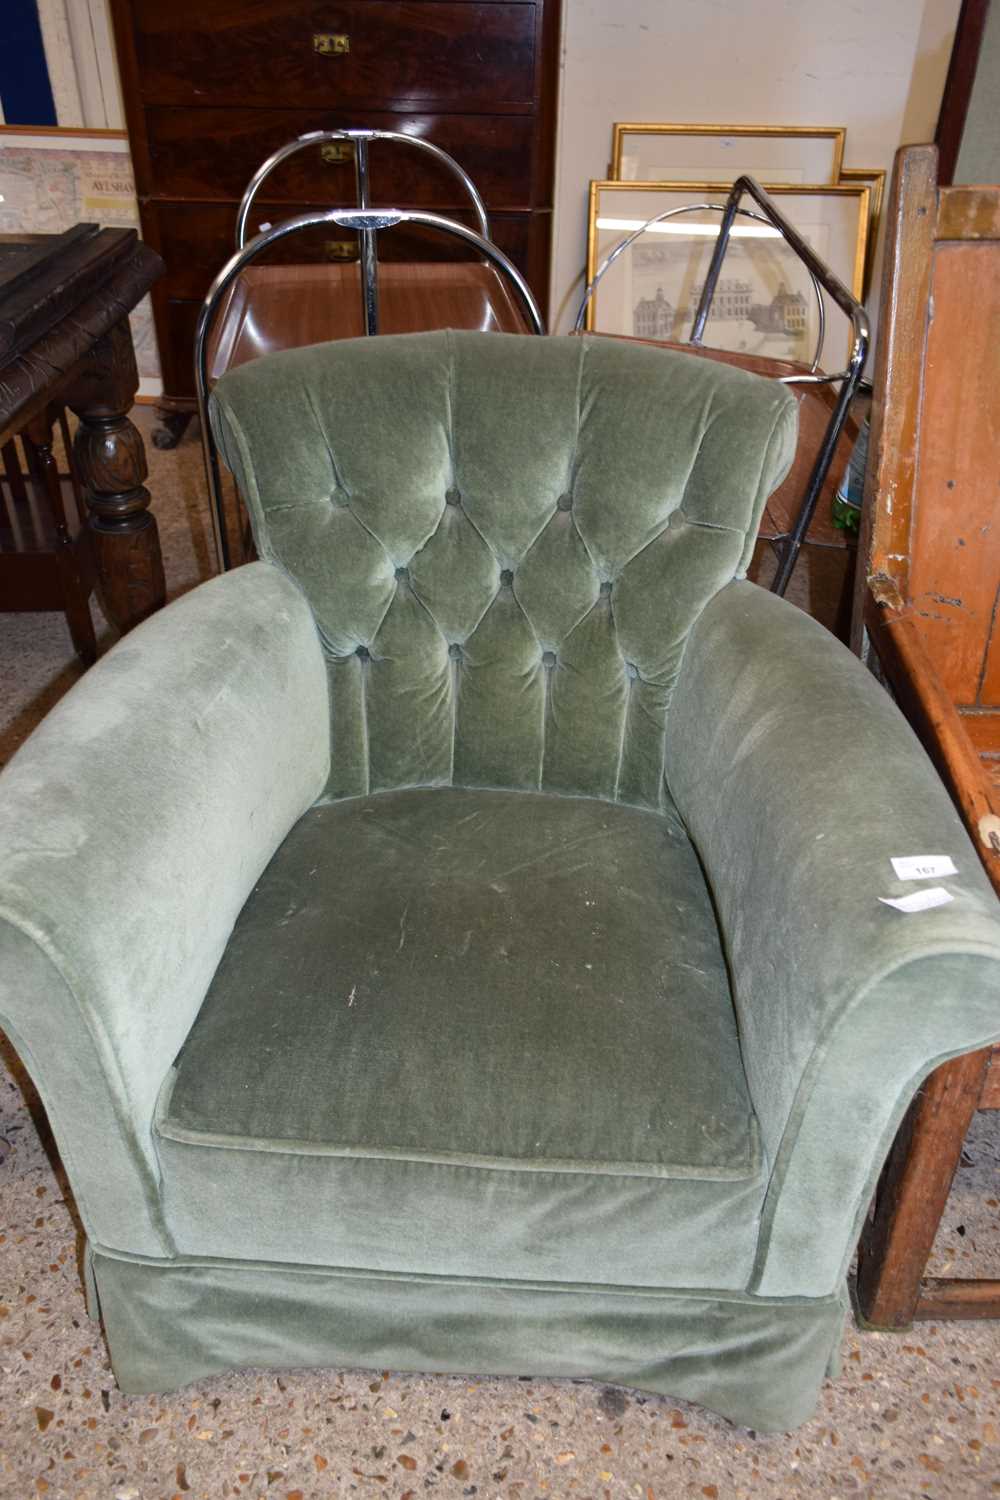 SMALL GREEN UPHOLSTERED TUB CHAIR